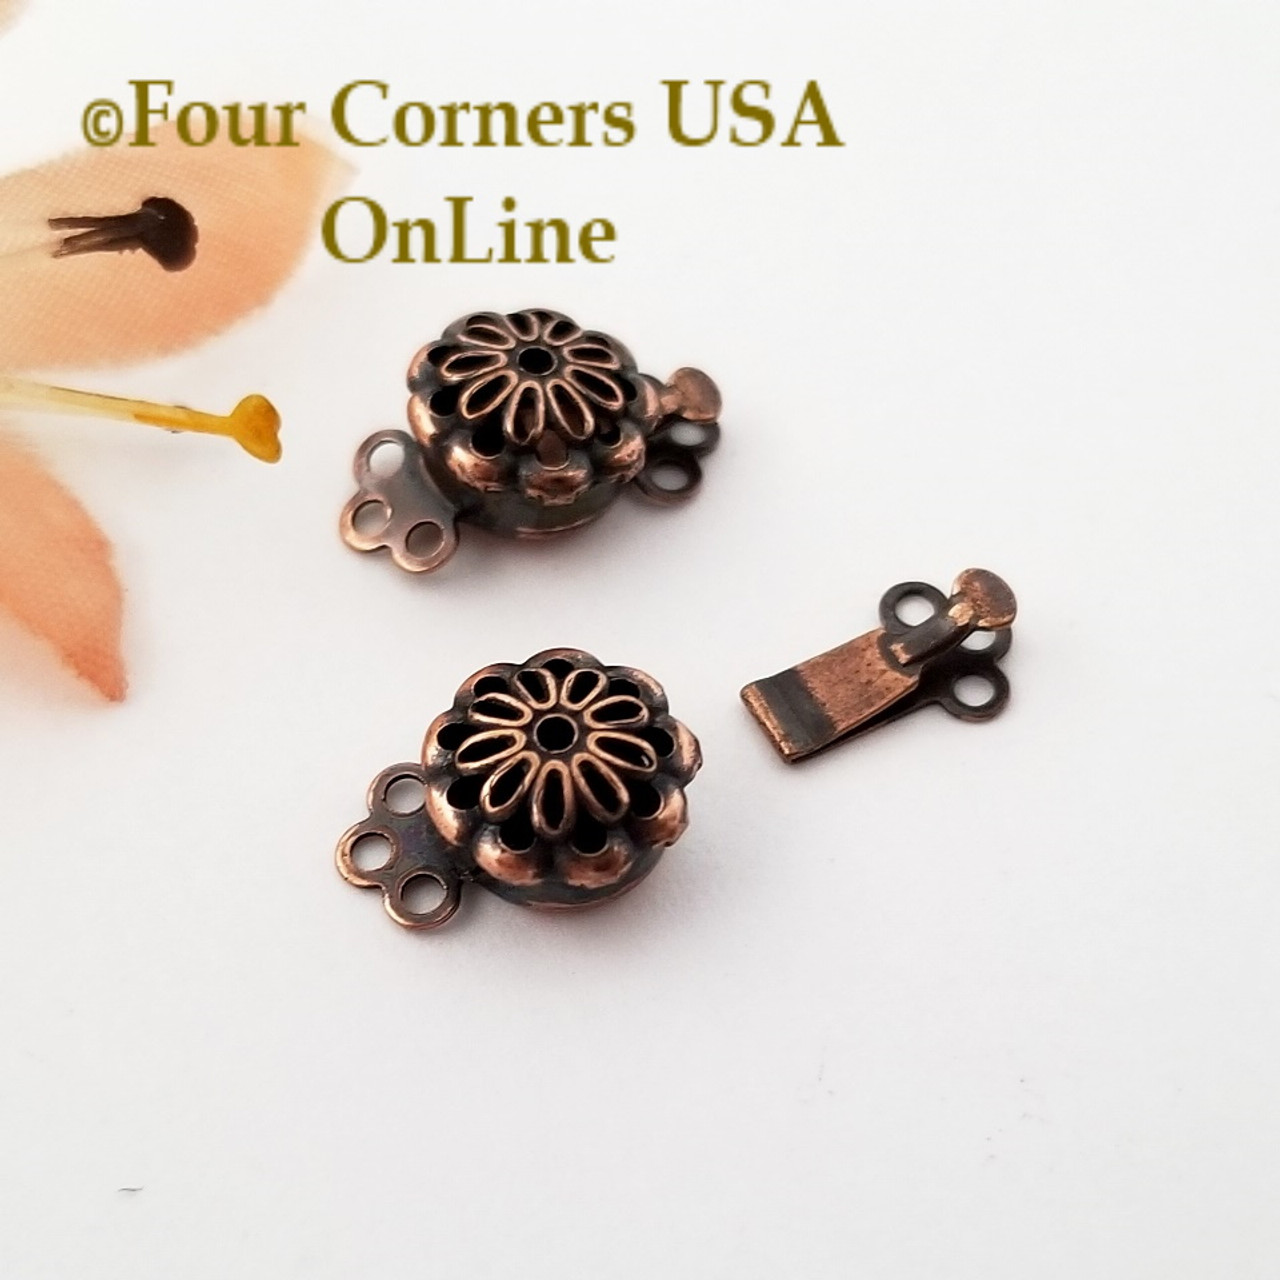 Copper Triple Strand Slide Clasp Jewelry Finding 10 Clasps Closeout Final  Sale BDZ-2116 - Four Corners USA Online